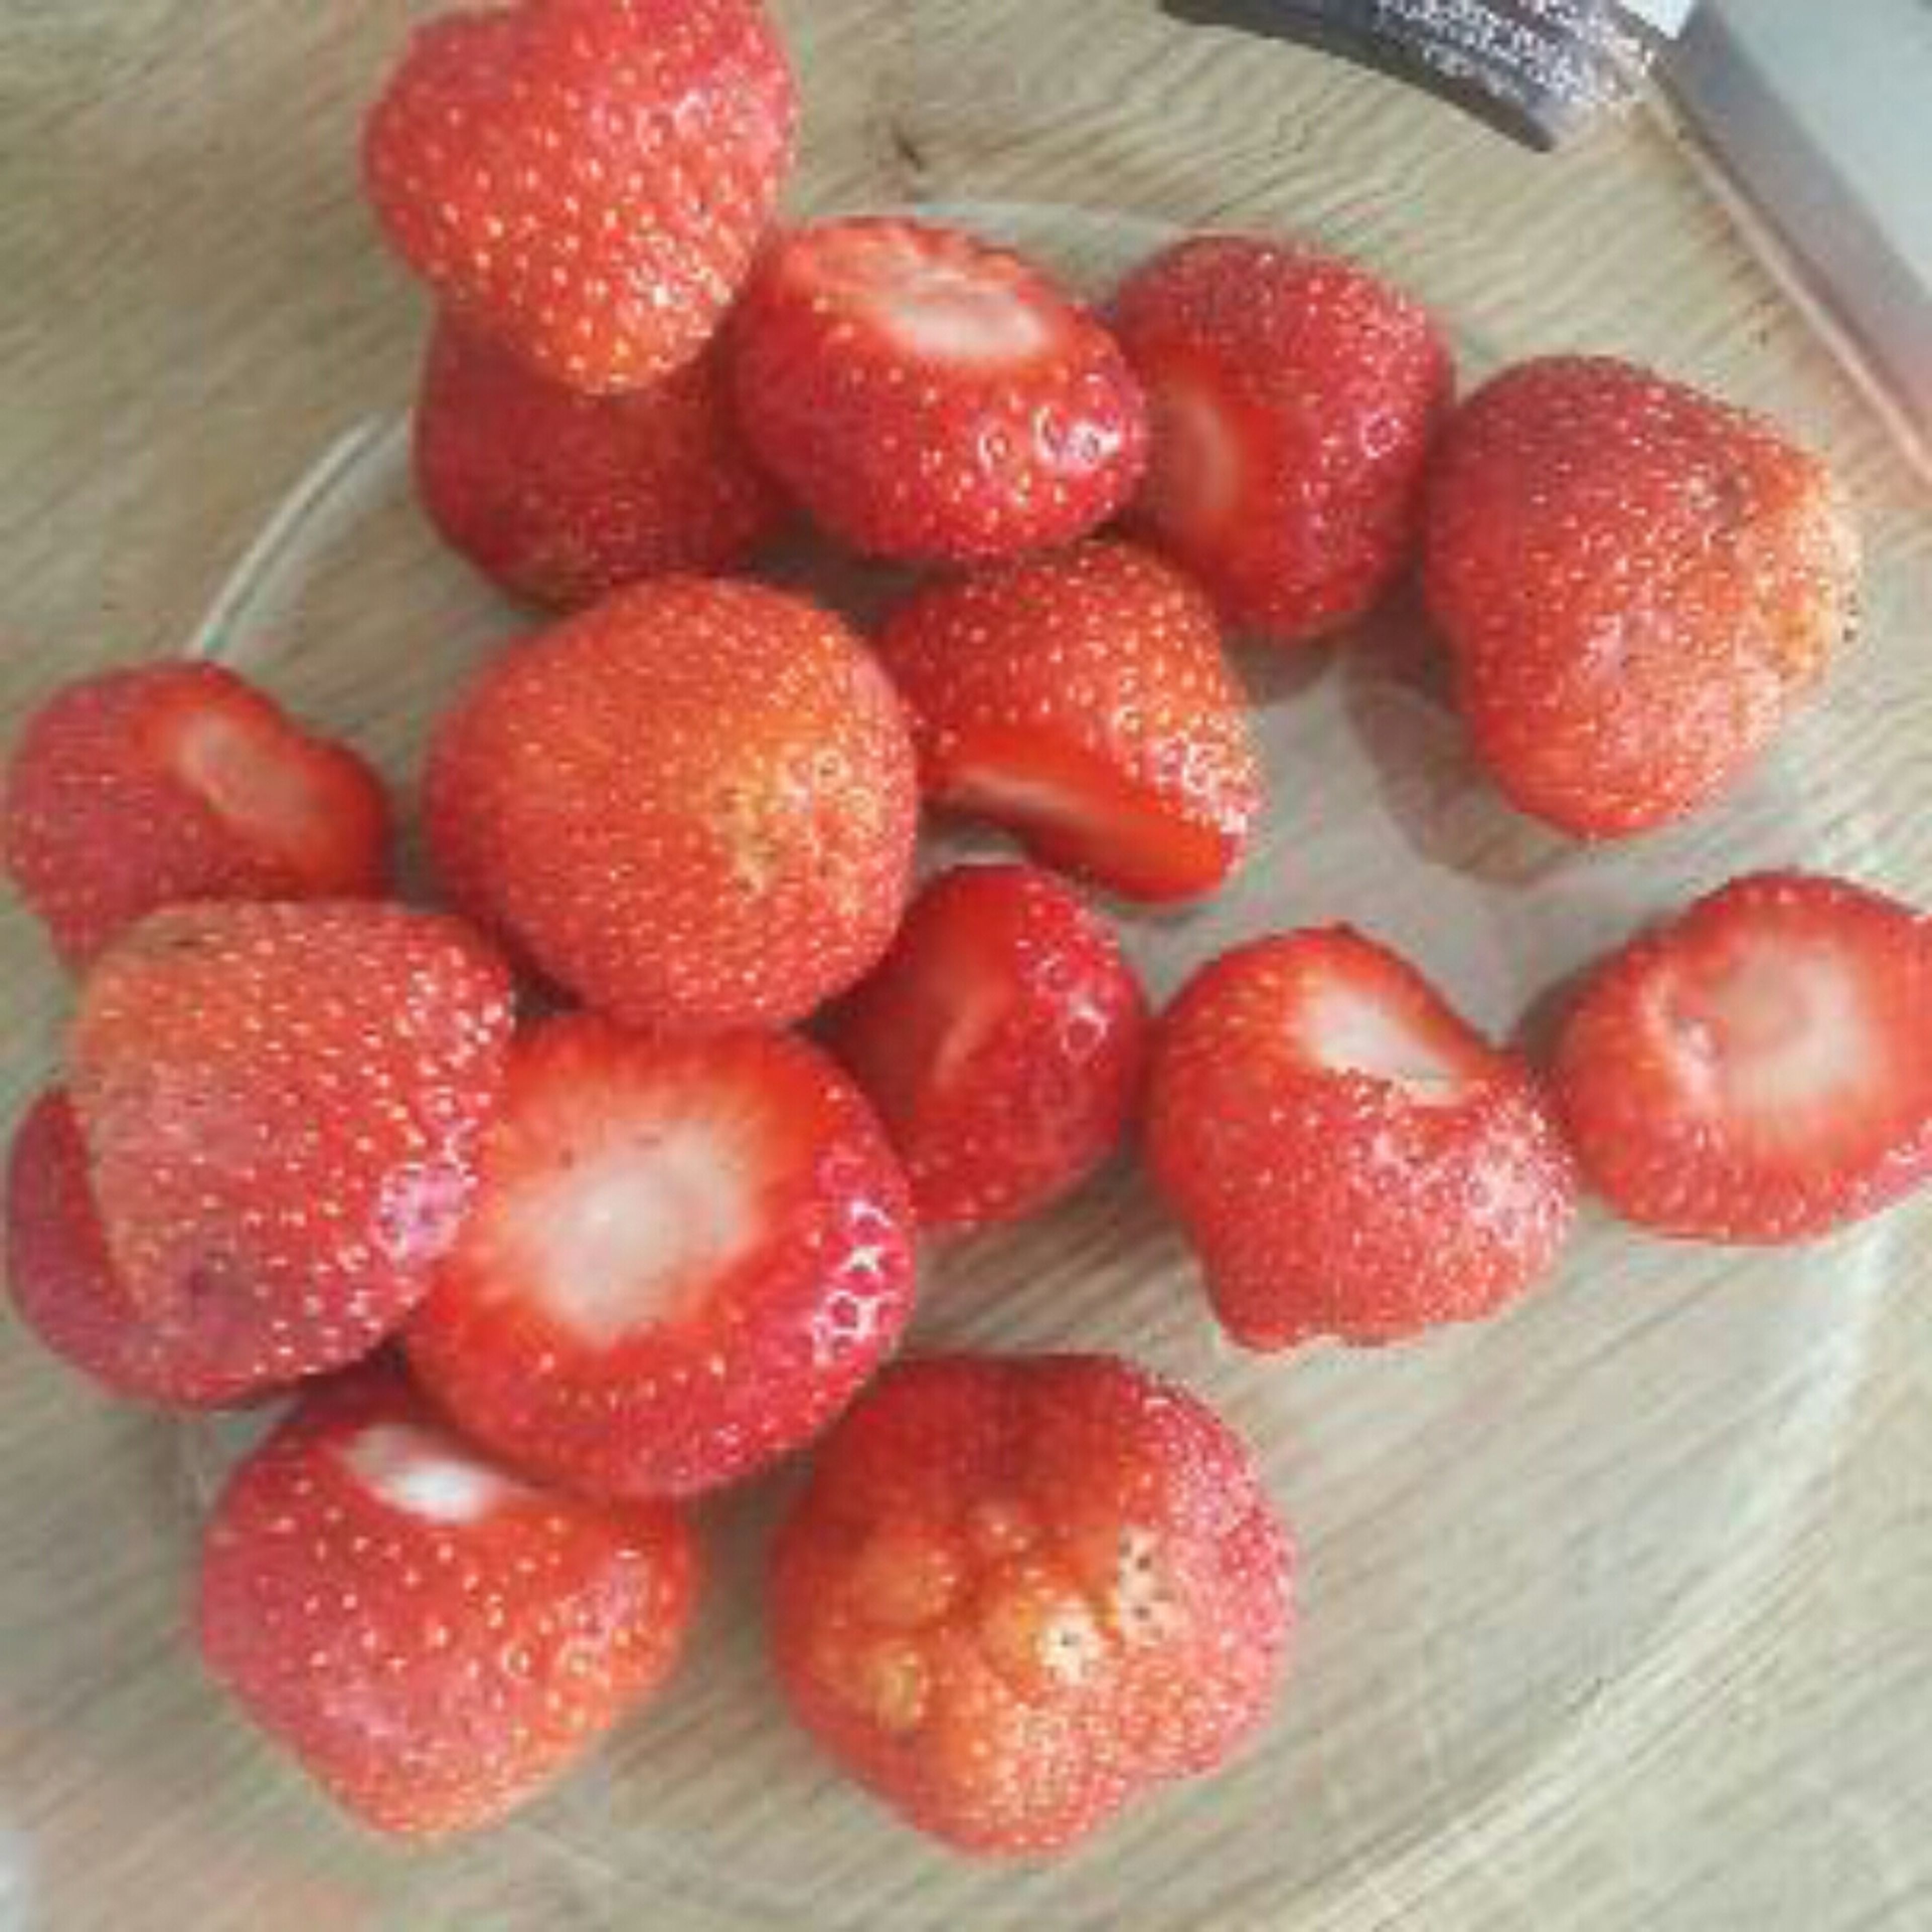 put strawberrys in bowl